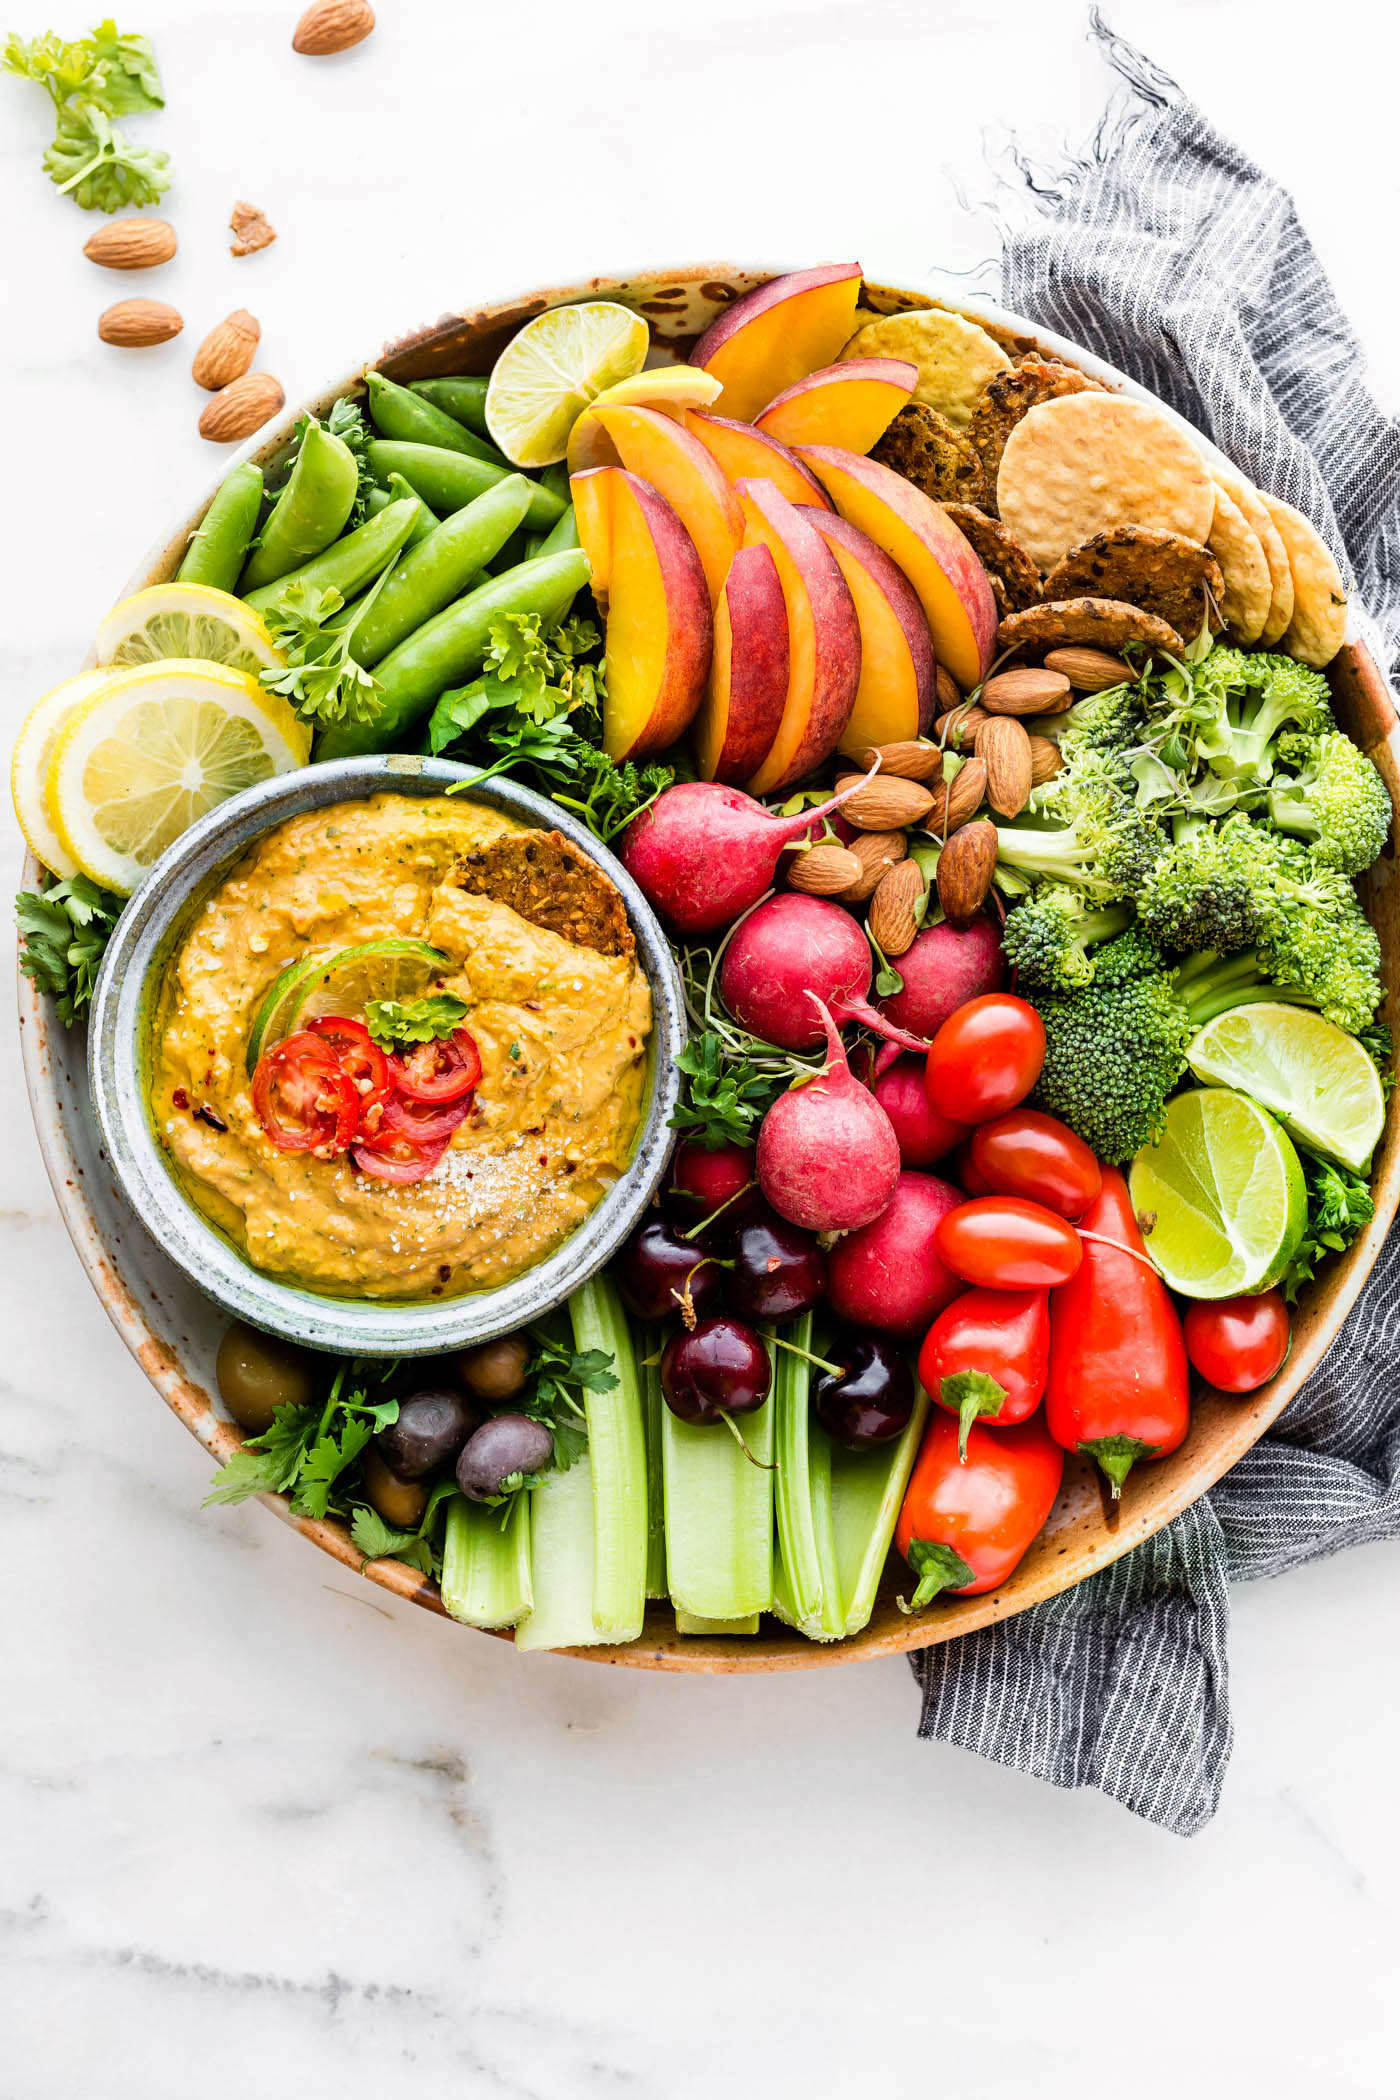 This Spicy mango avocado yogurt dip is NOT your average healthy appetizer! It’s A NEW TASTY way to eat veggies! Mango, yogurt, avocado, and a kick of spice from chilis makes this easy snack recipe a protein rich dip!